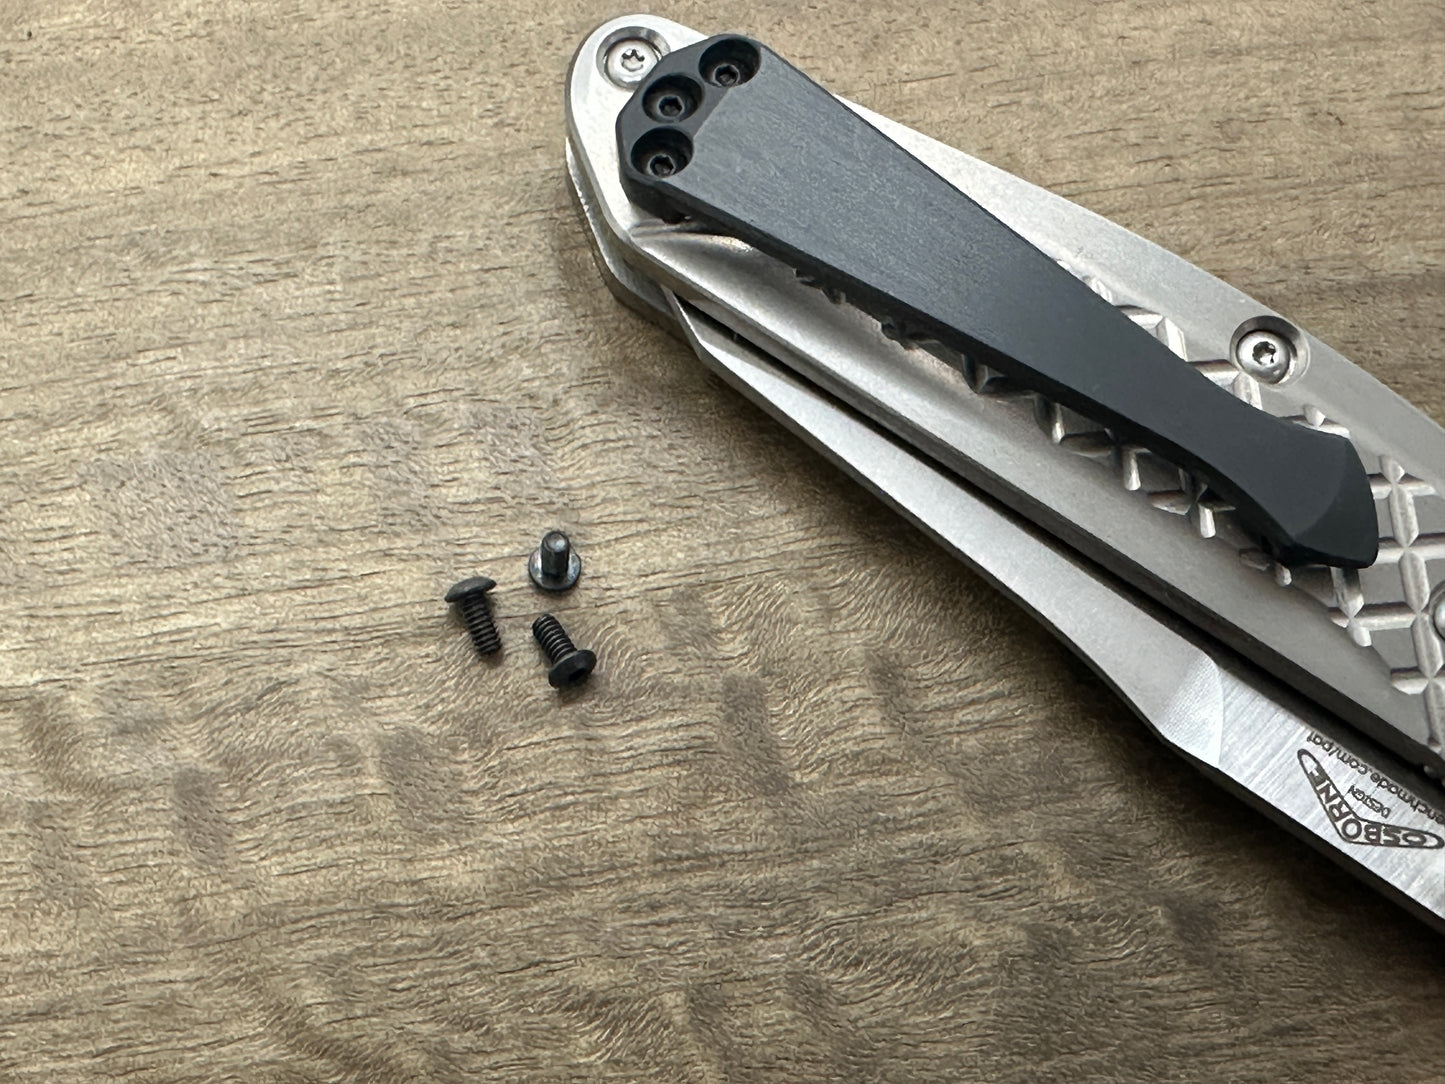 3x Black Stainless Clip Screws for most Benchmade knife Clips - Hex Button Head